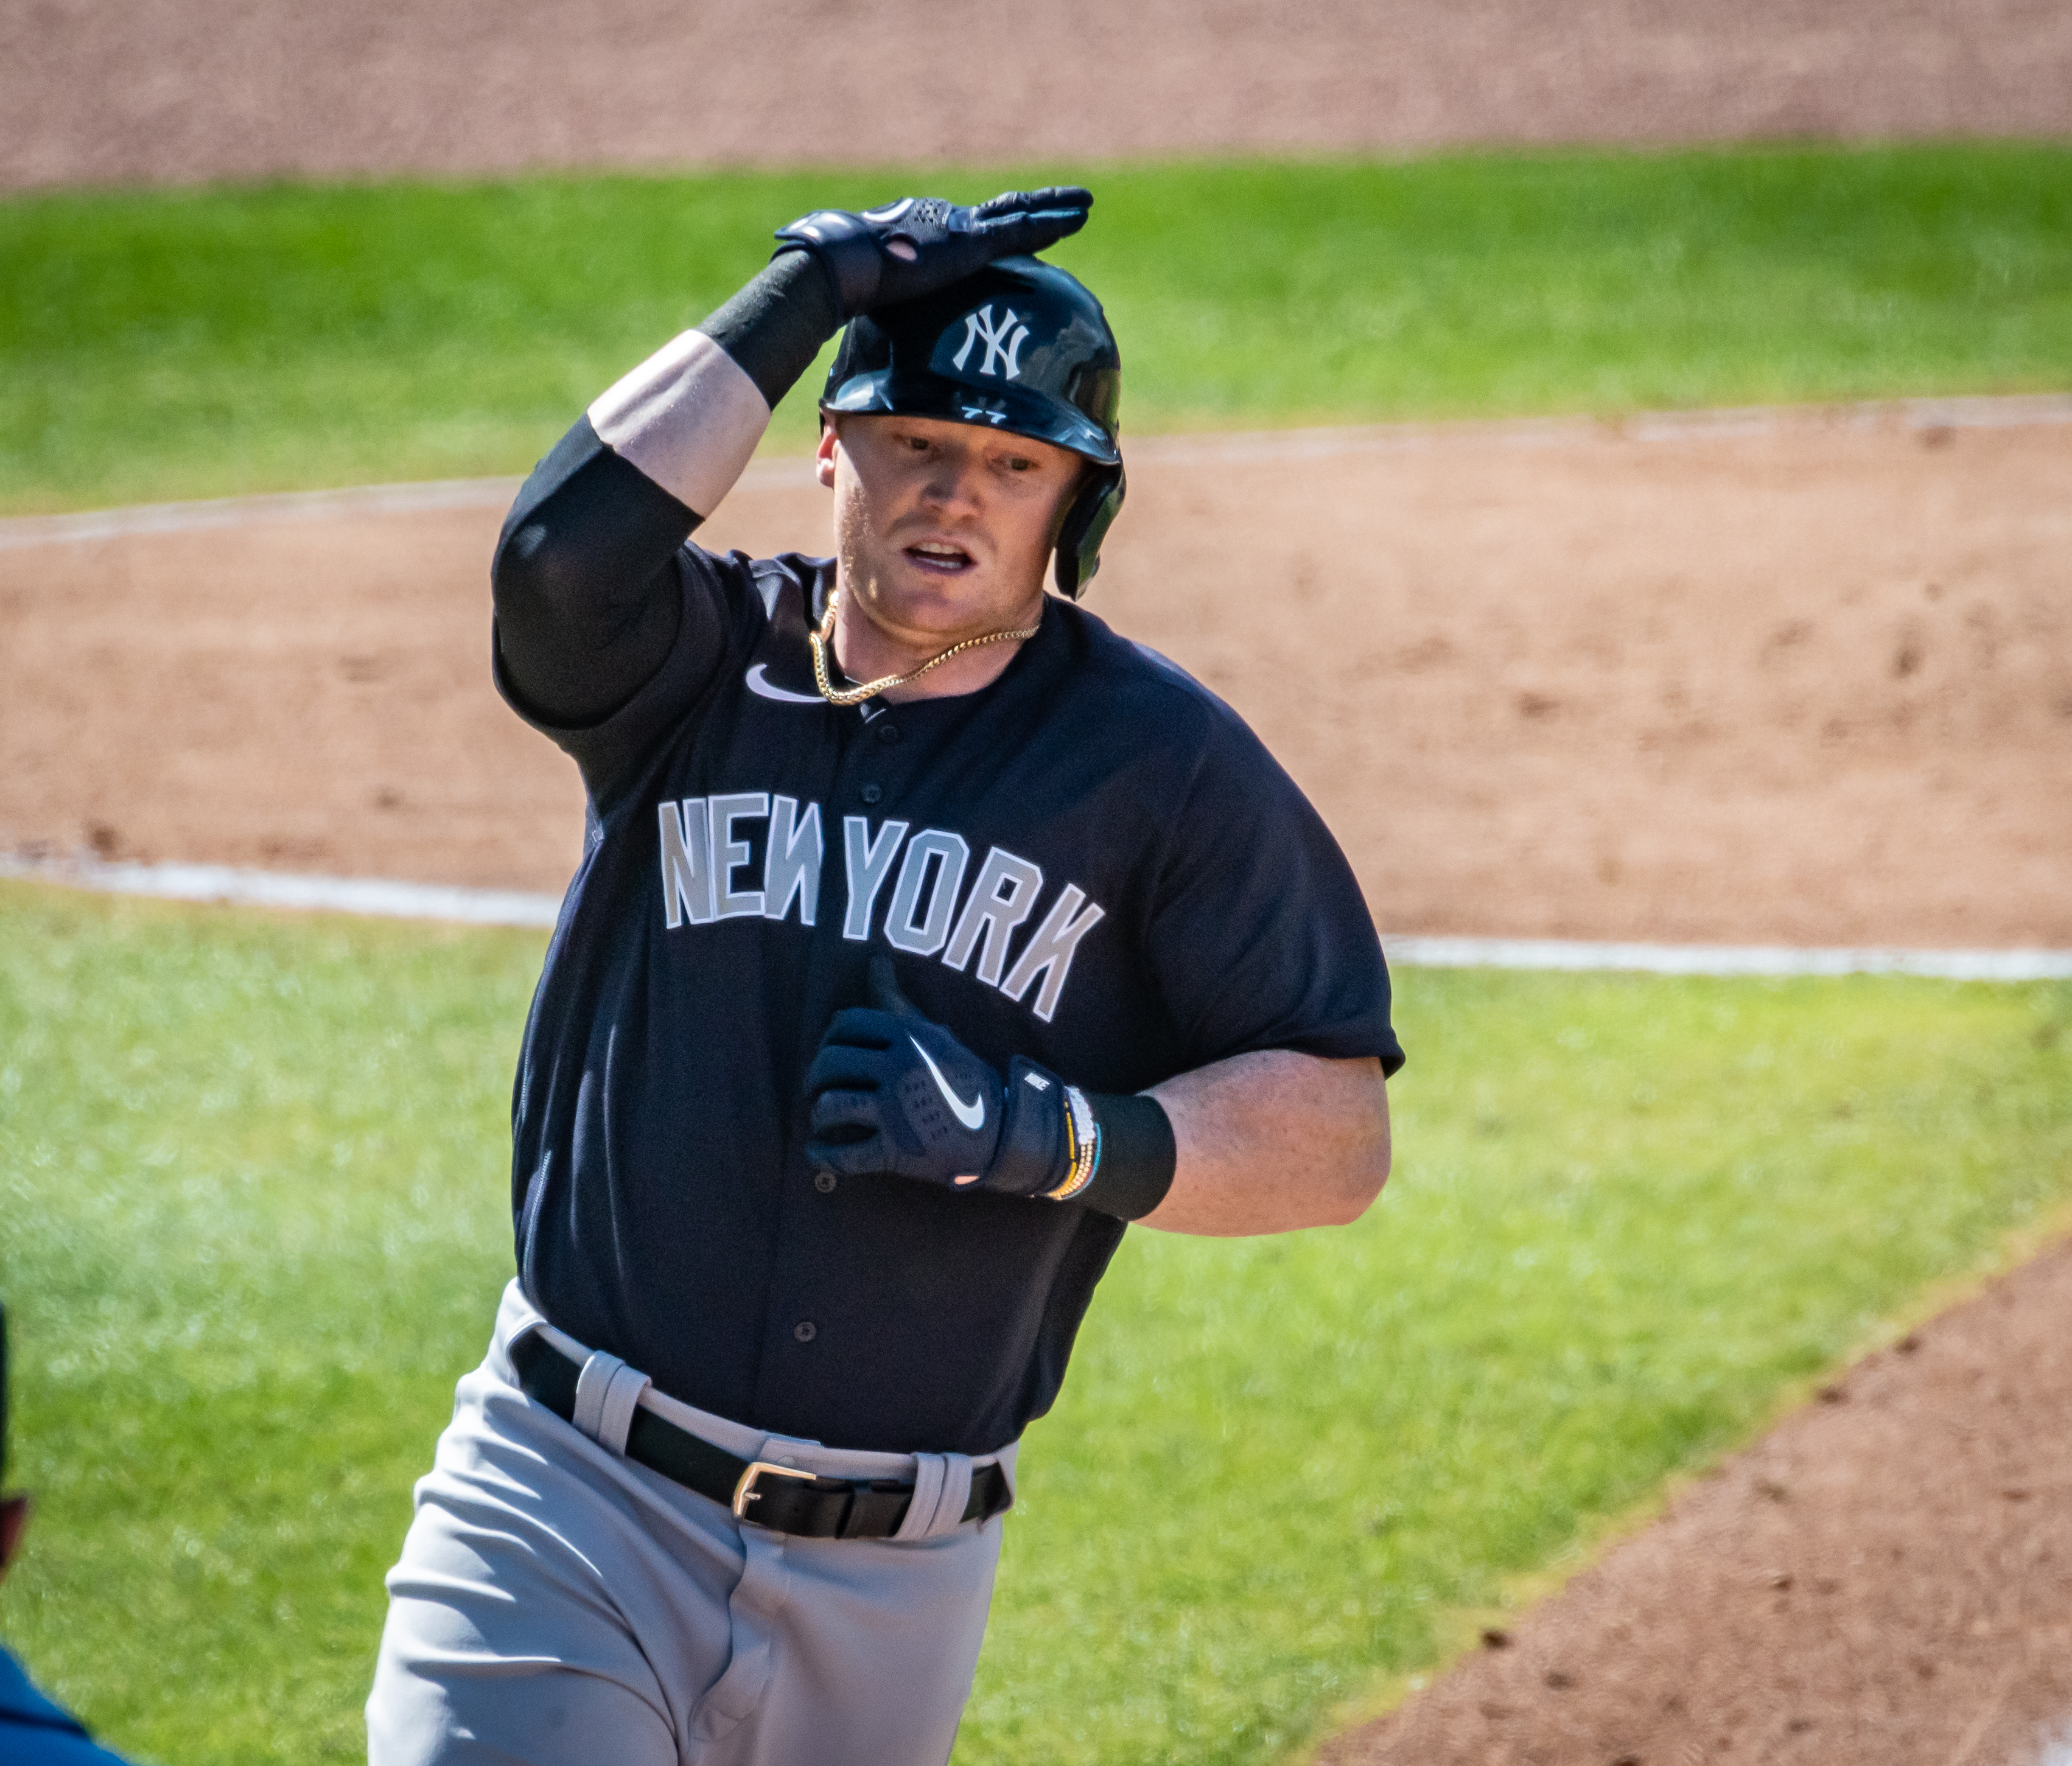 New York Yankees’ Clint Frazier hits a single in spring training game against the Philadelphia Phillies